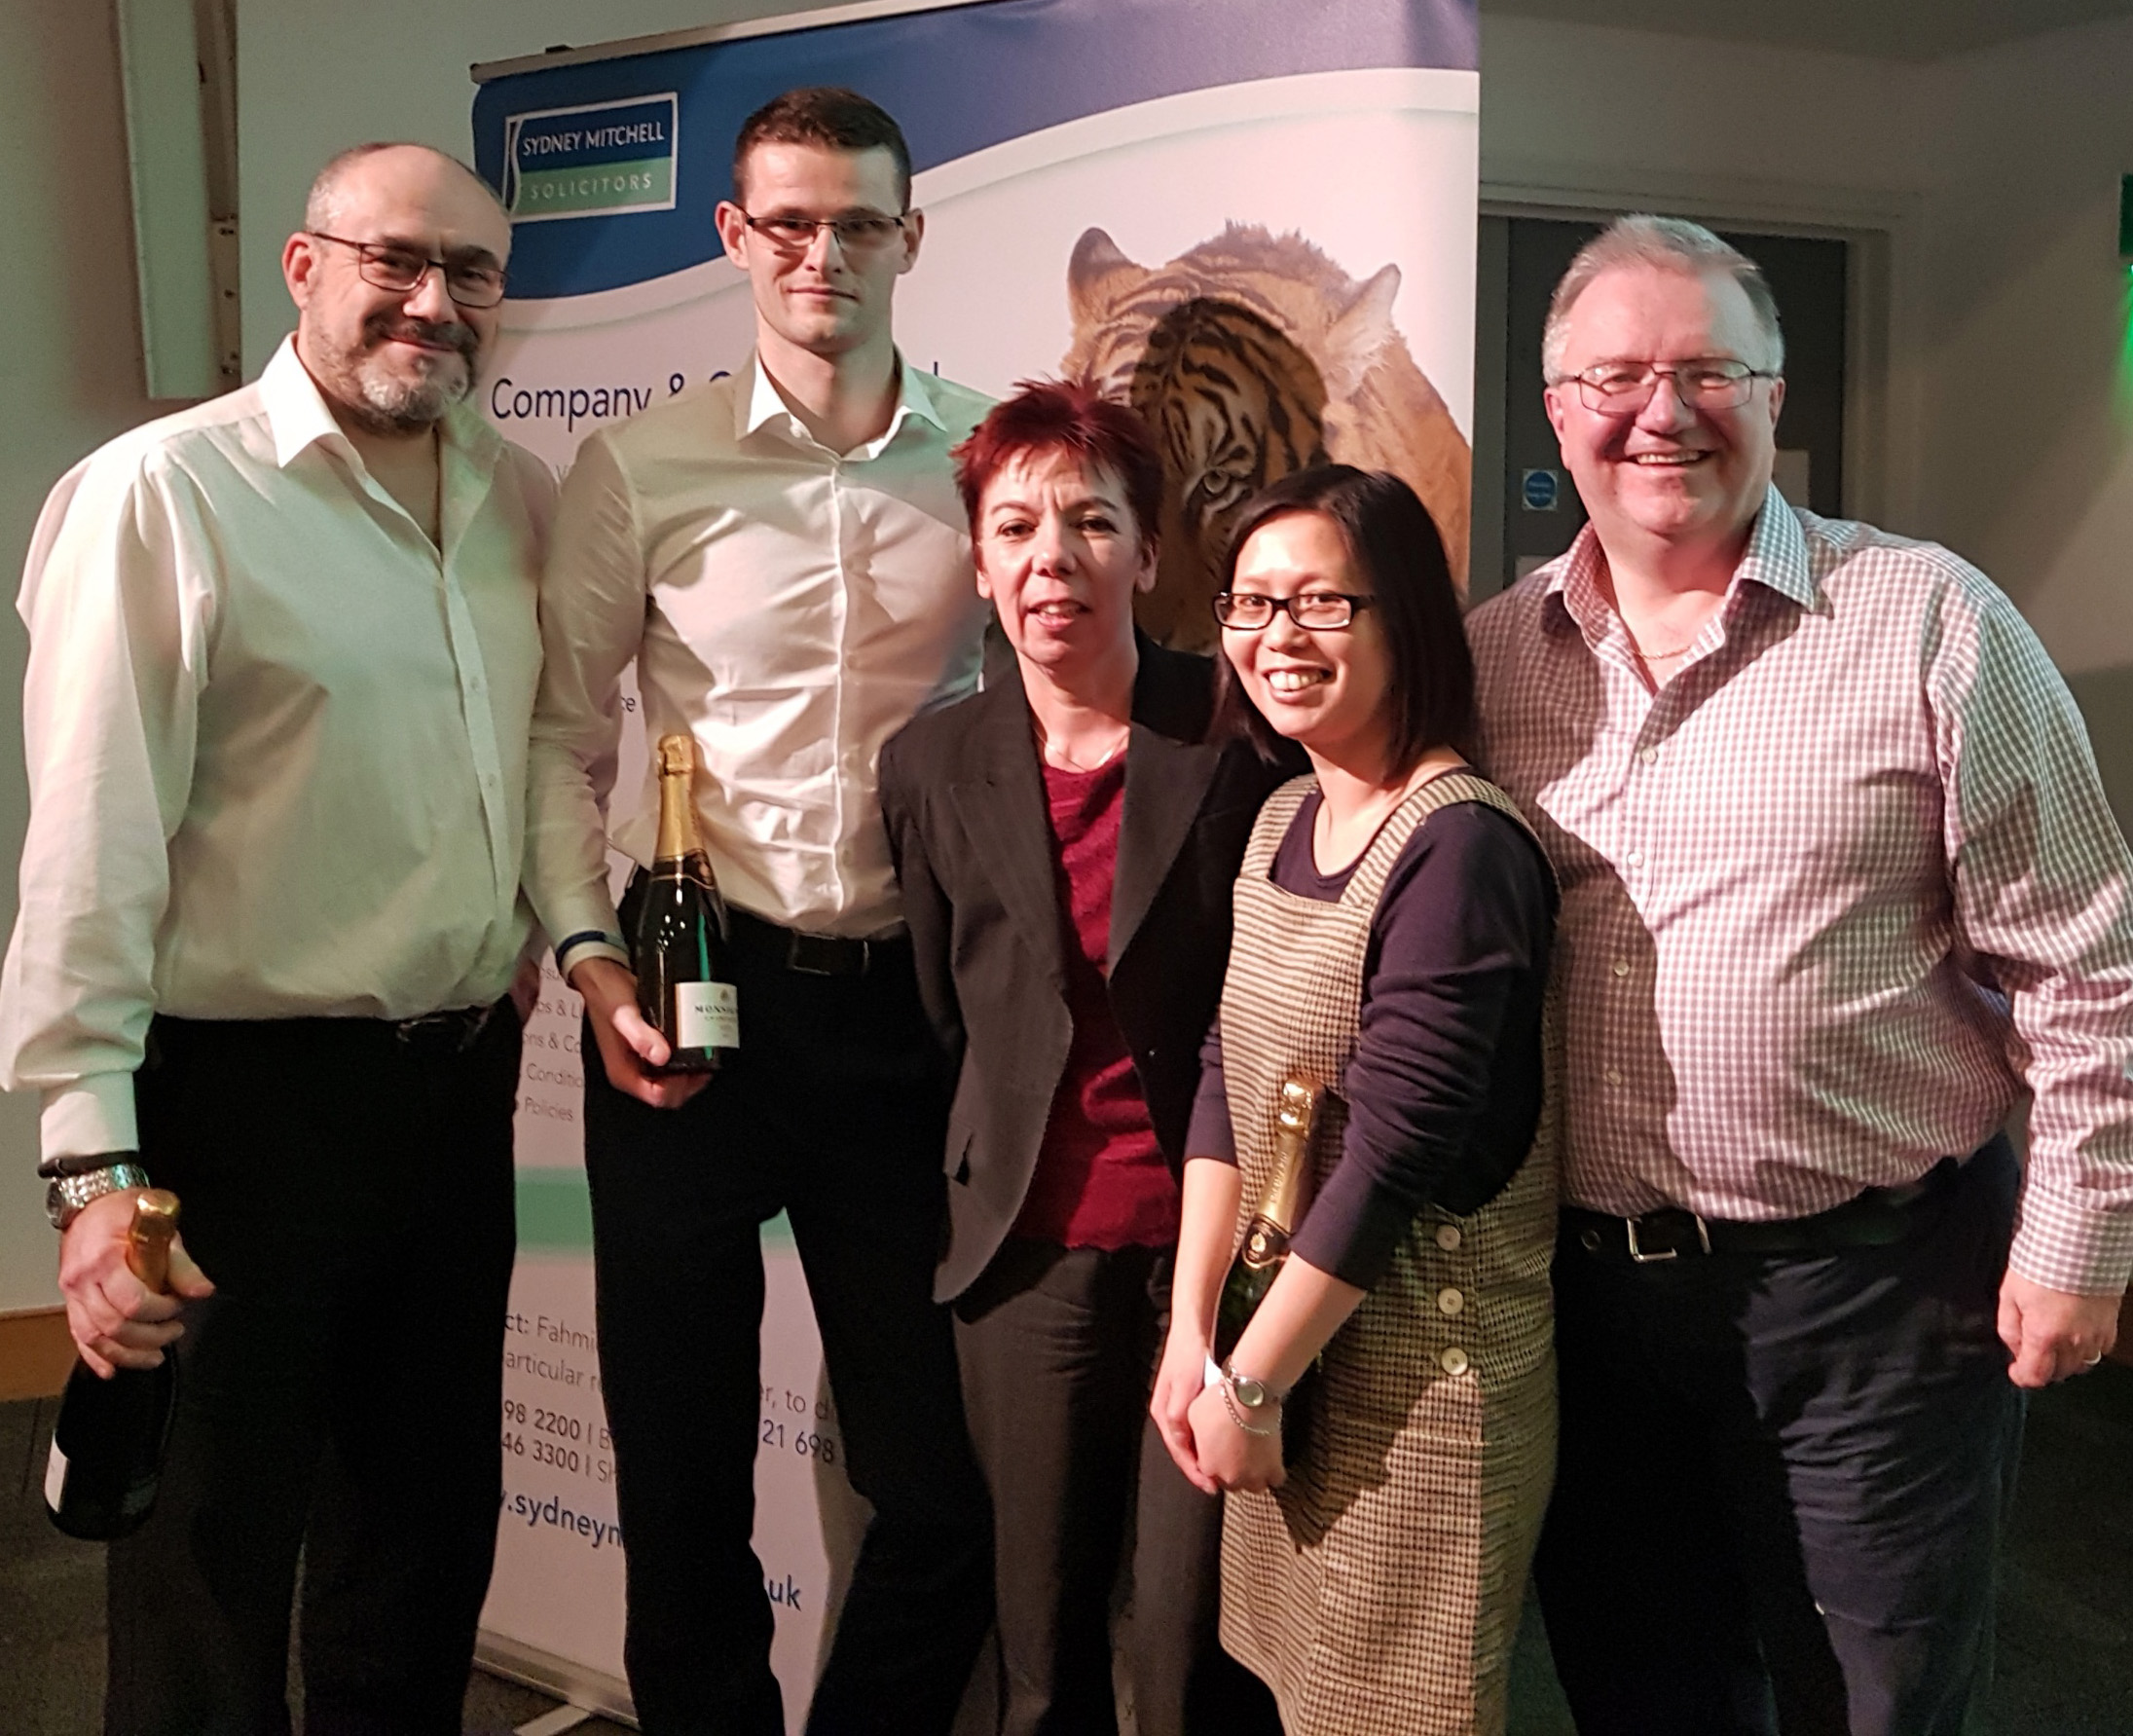 Sydney Mitchell Charity Quiz Winners - Dains Chartered Accountants